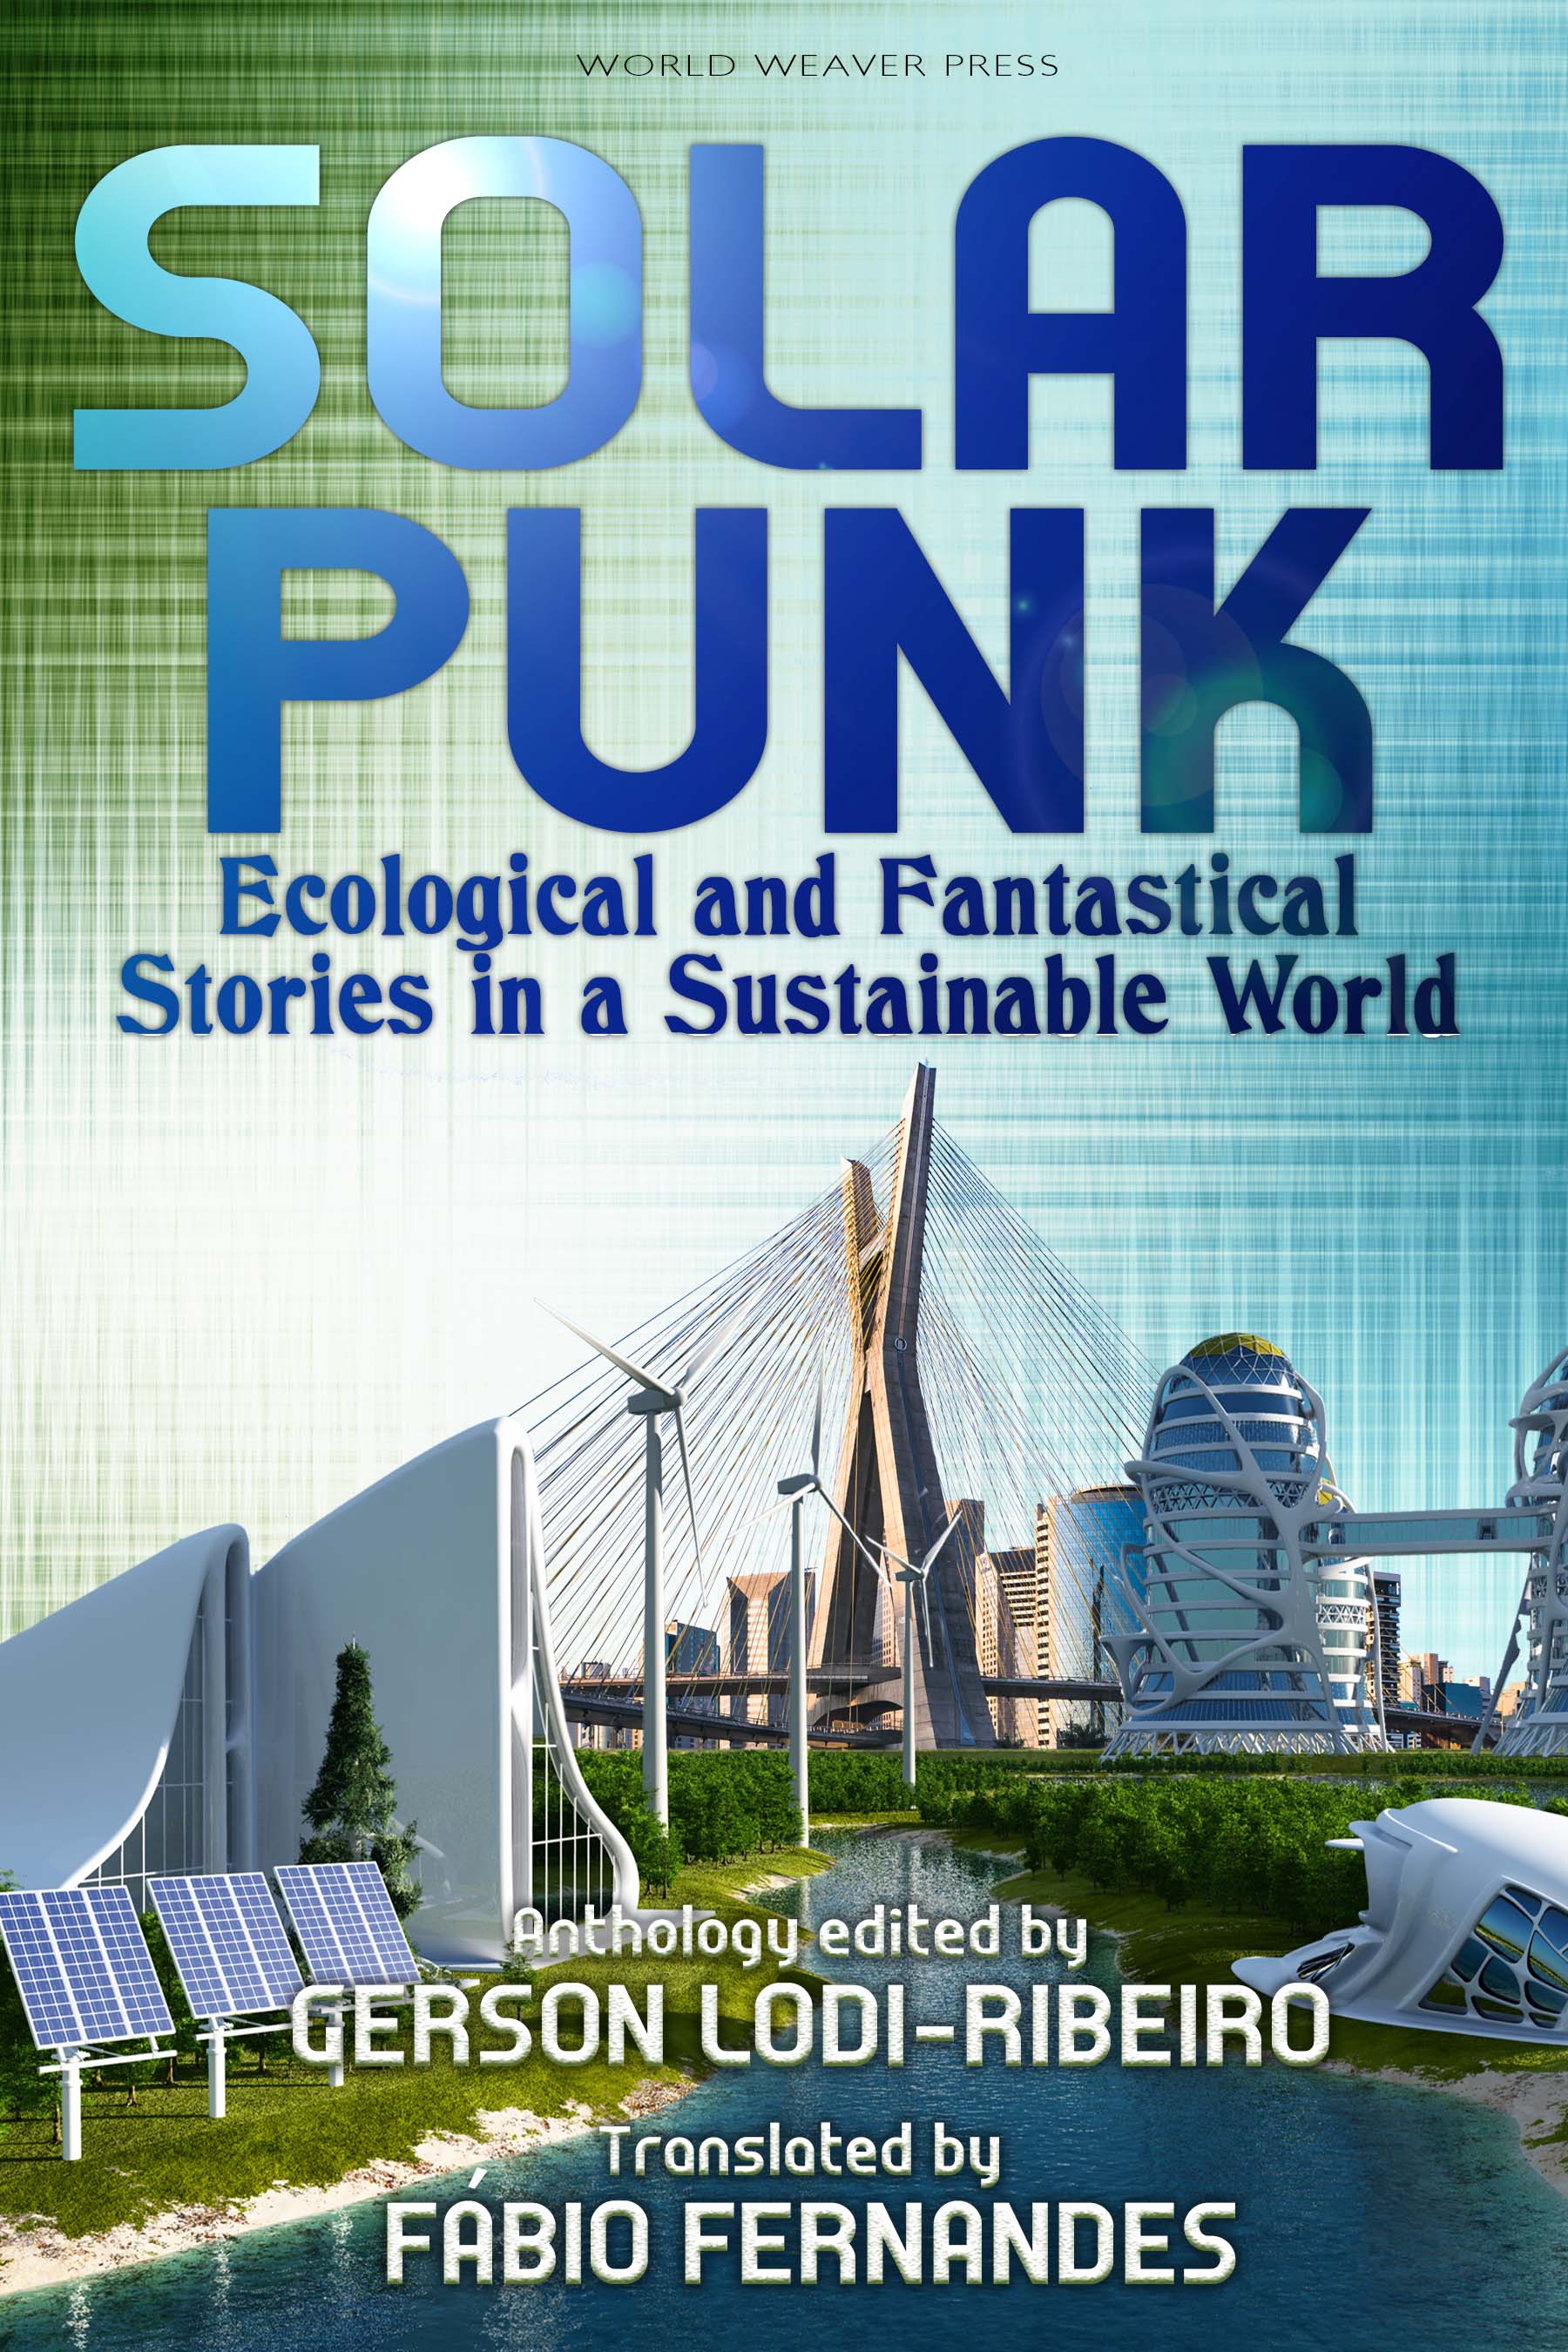 Solarpunk: Ecological and Fantastical Stories in a Sustainable World (2018, World Weaver Press)